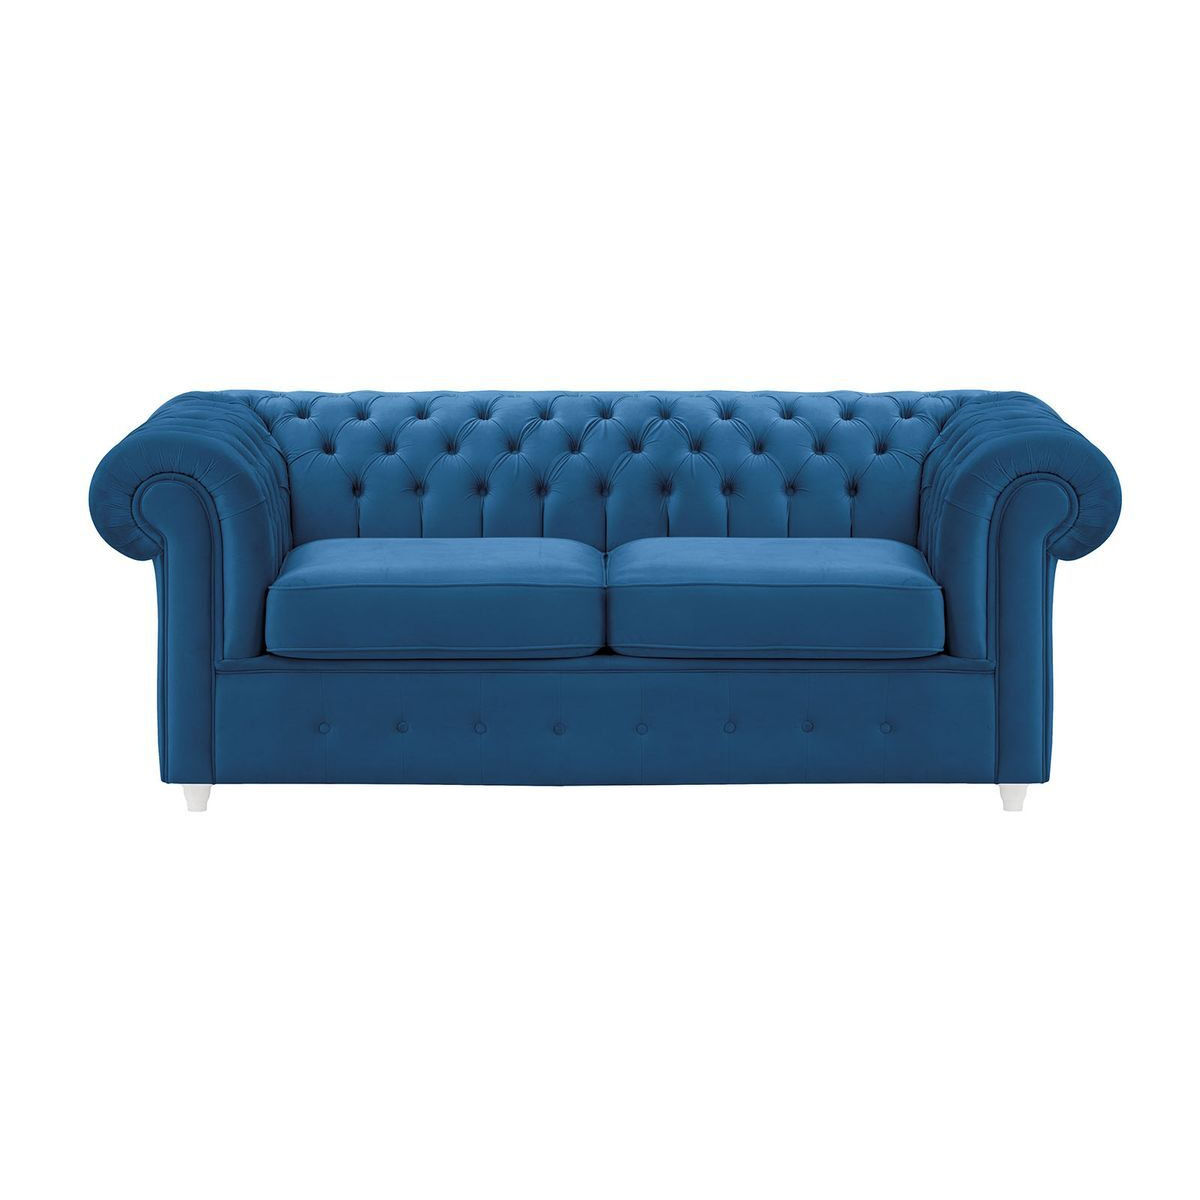 Chesterfield Max 2 Seater Sofa Bed, blue, Leg colour: white - image 1